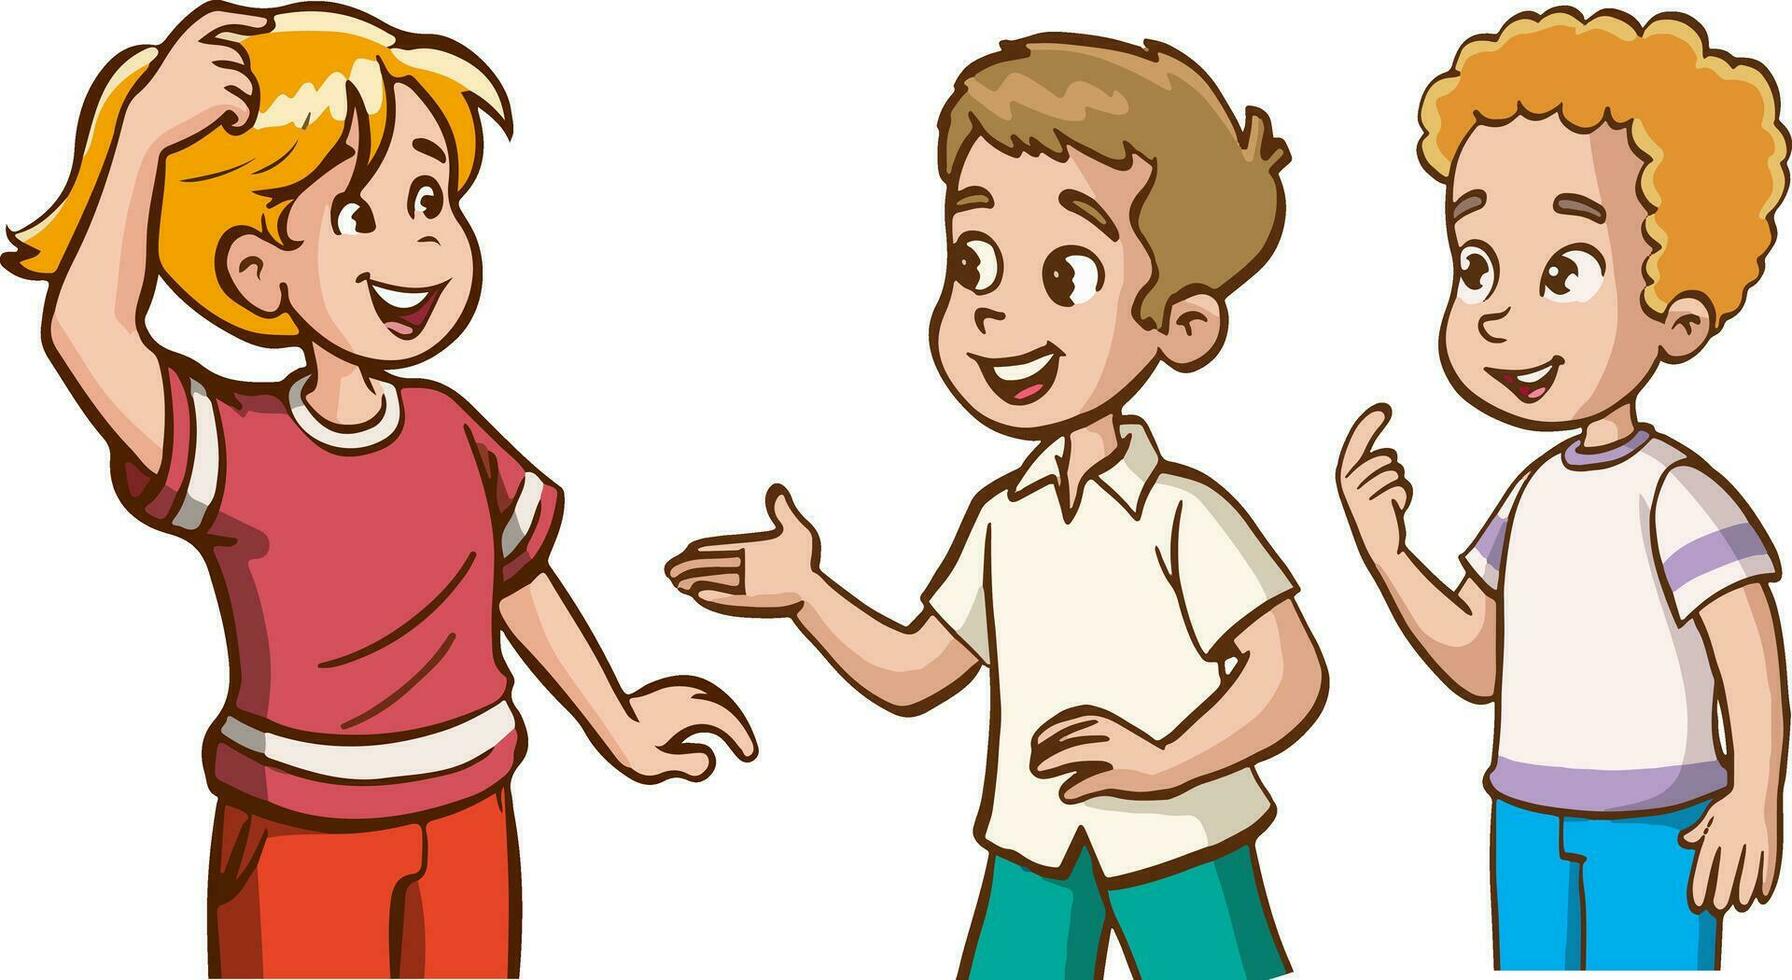 group of kids chatting vector illustration